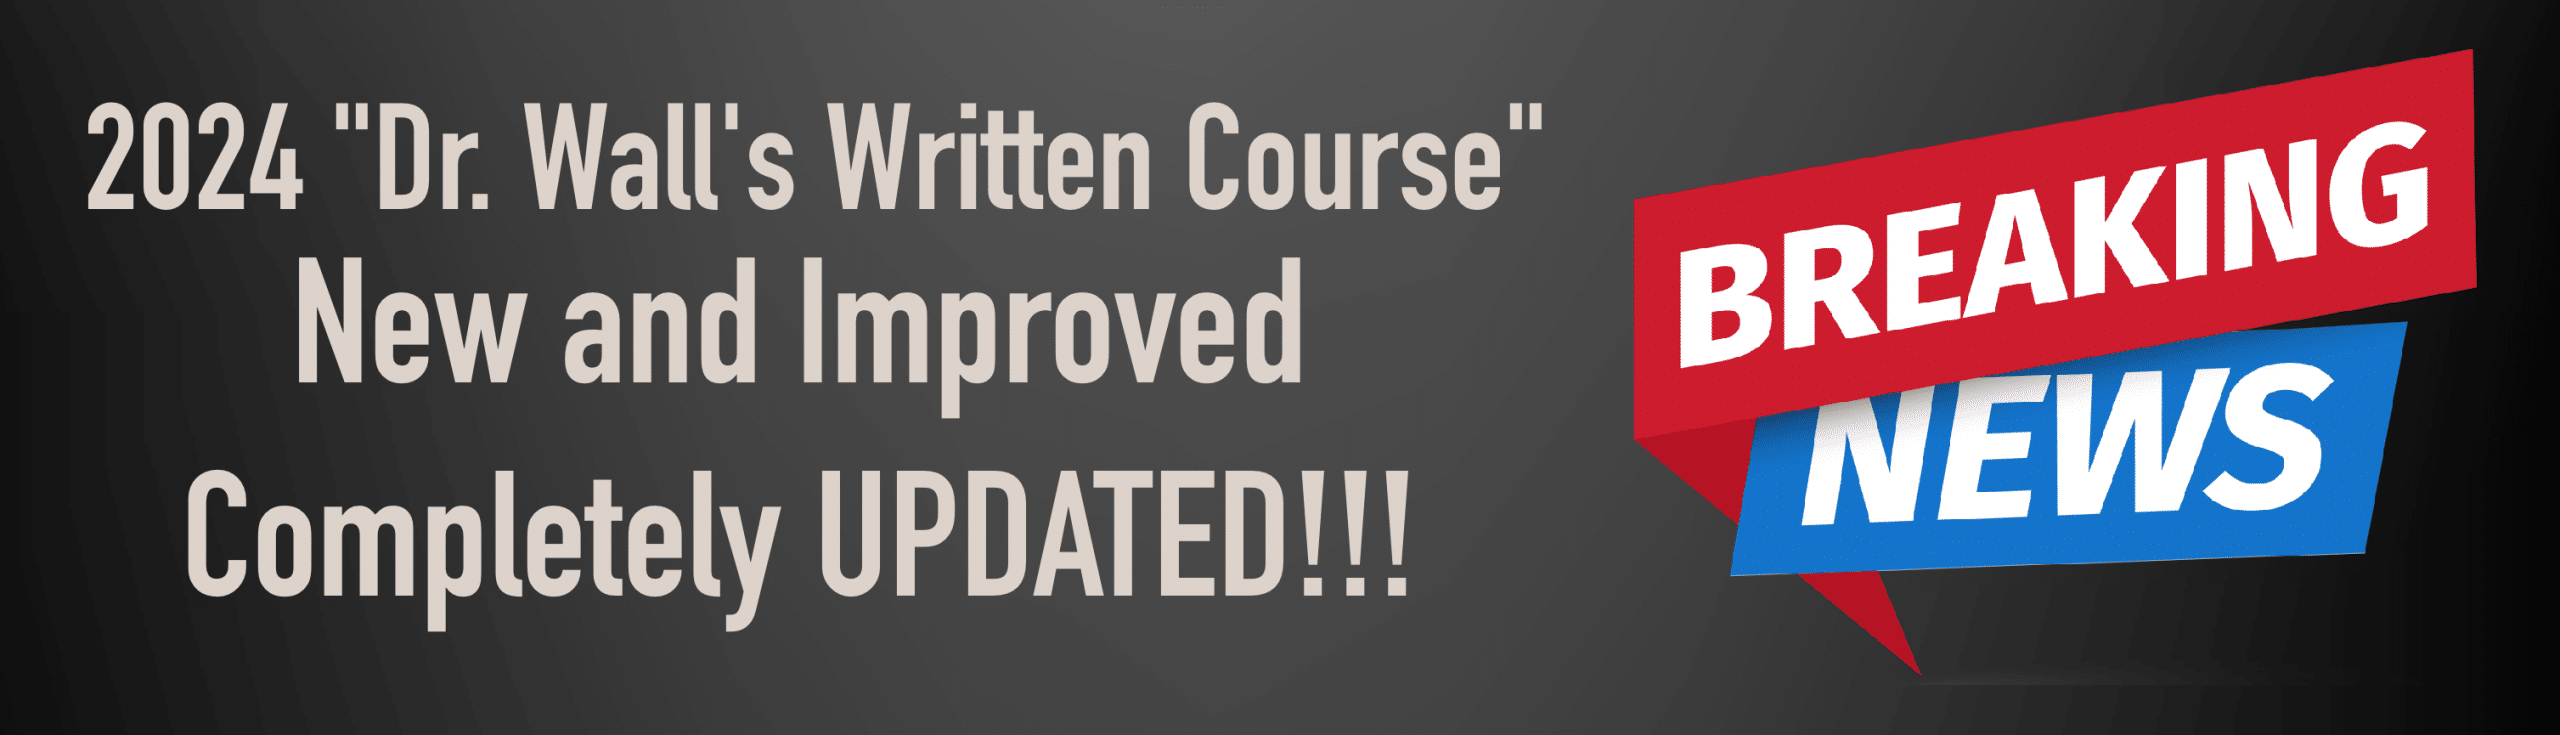 2024 Dr. Wall's Written Course all new and improved Completel updated